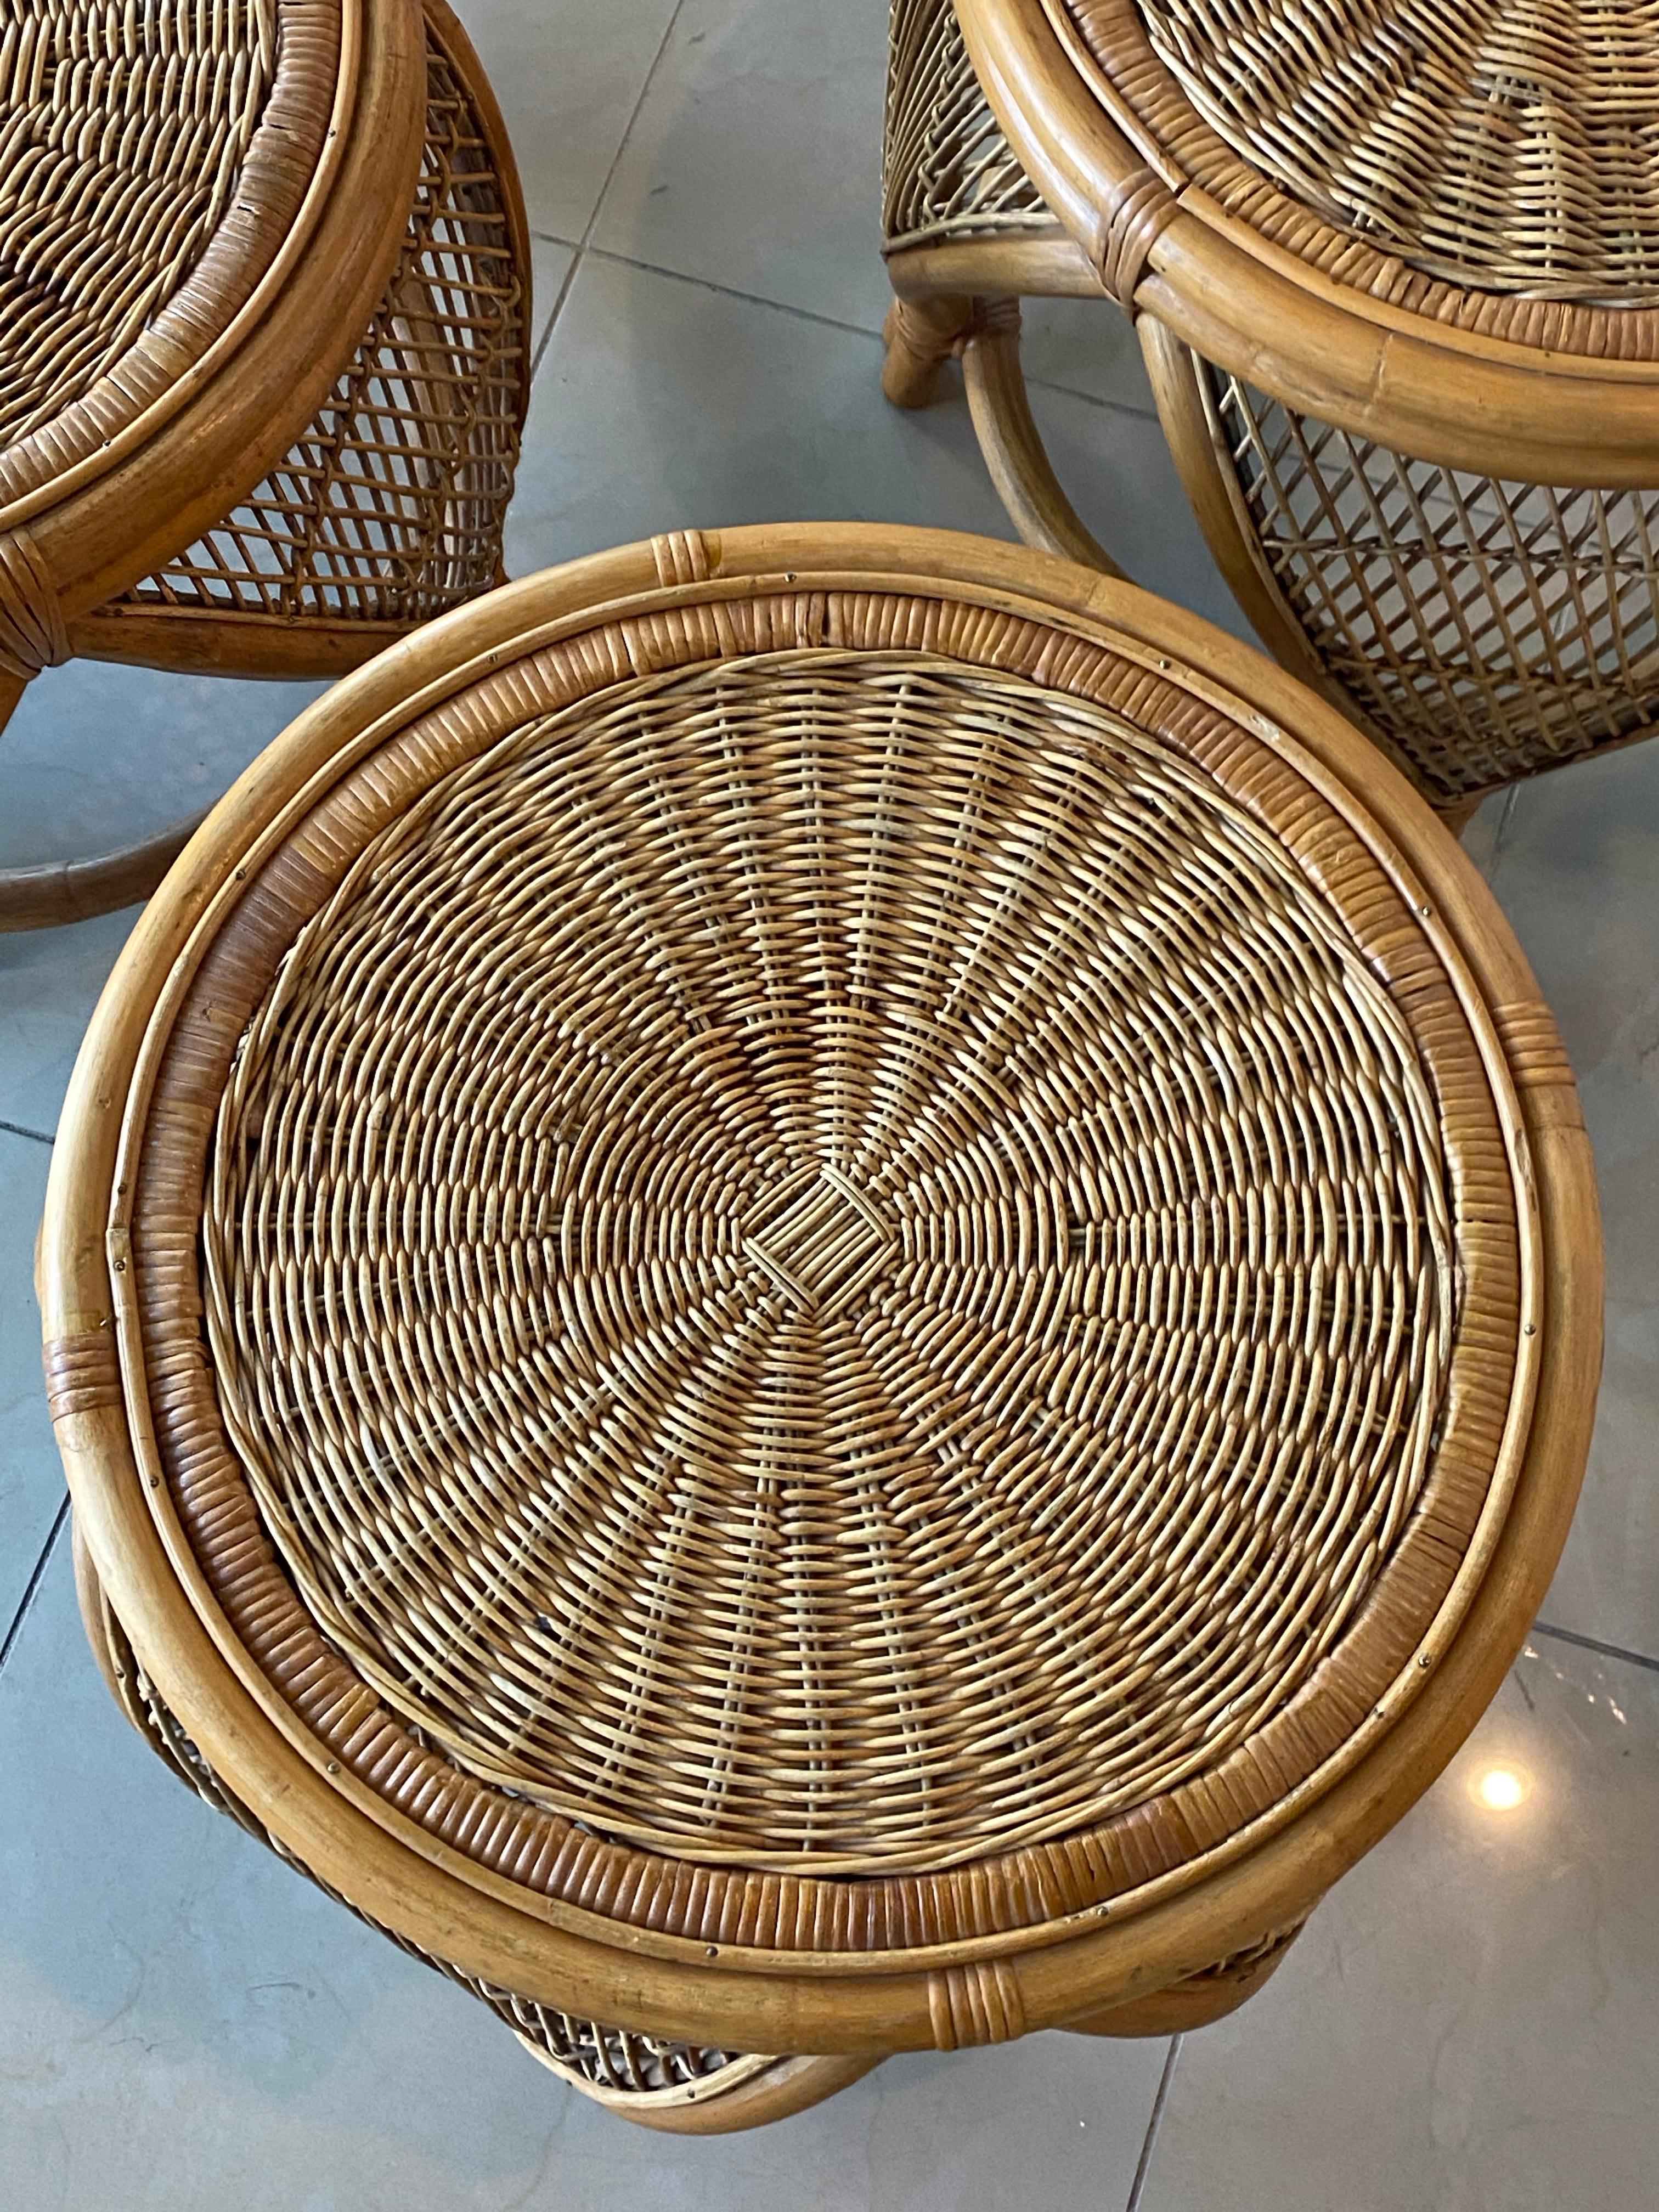 Hollywood Regency Vintage Set of 3 Rattan & Wicker Moroccan Stools Benches Ottomans Footstools